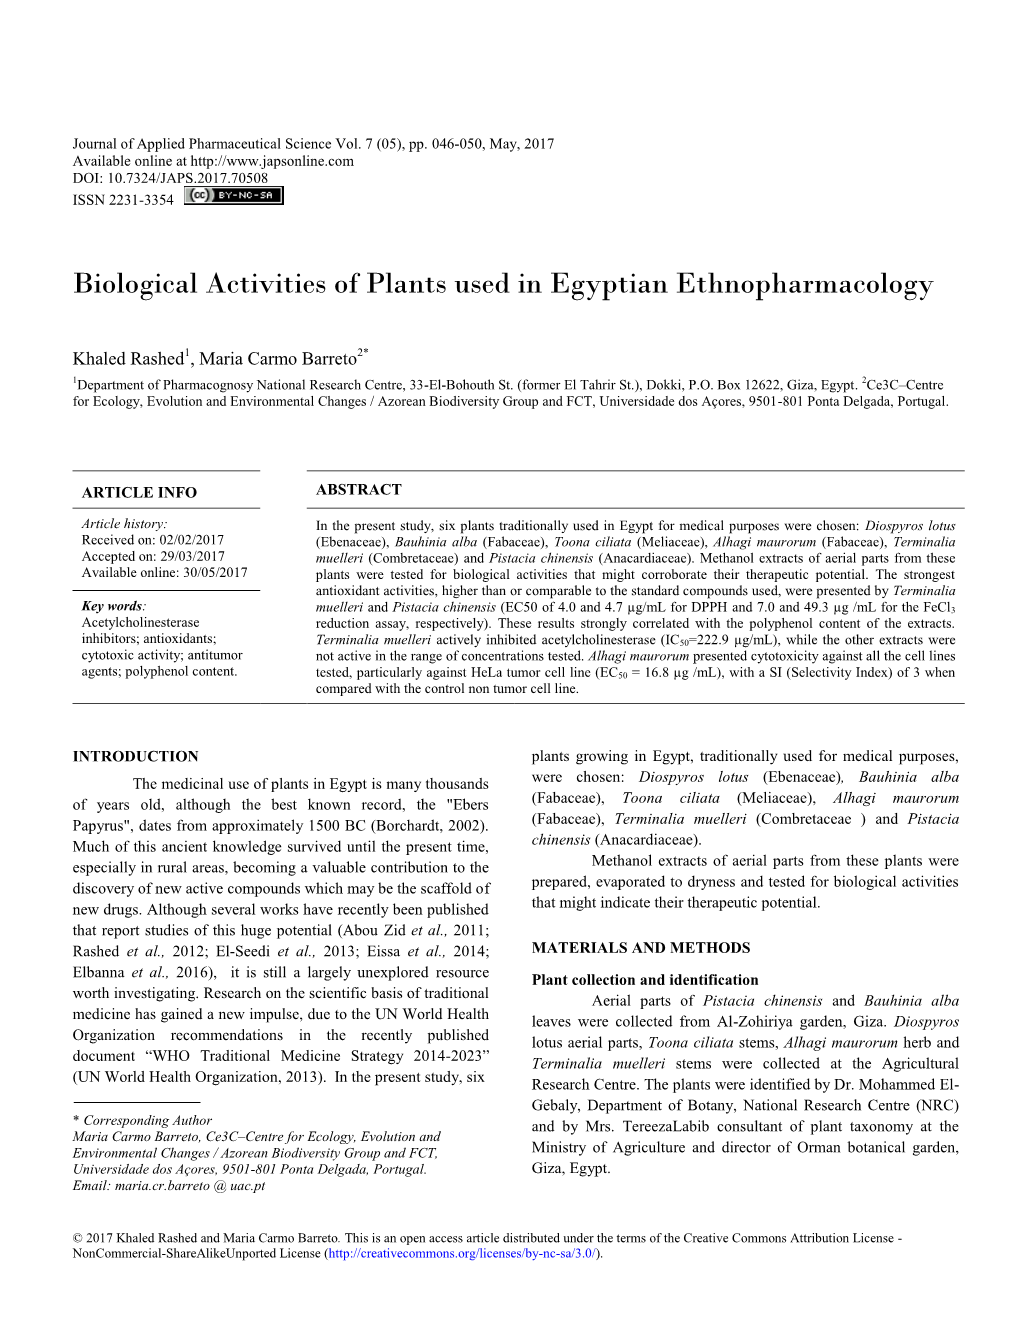 Biological Activities of Plants Used in Egyptian Ethnopharmacology